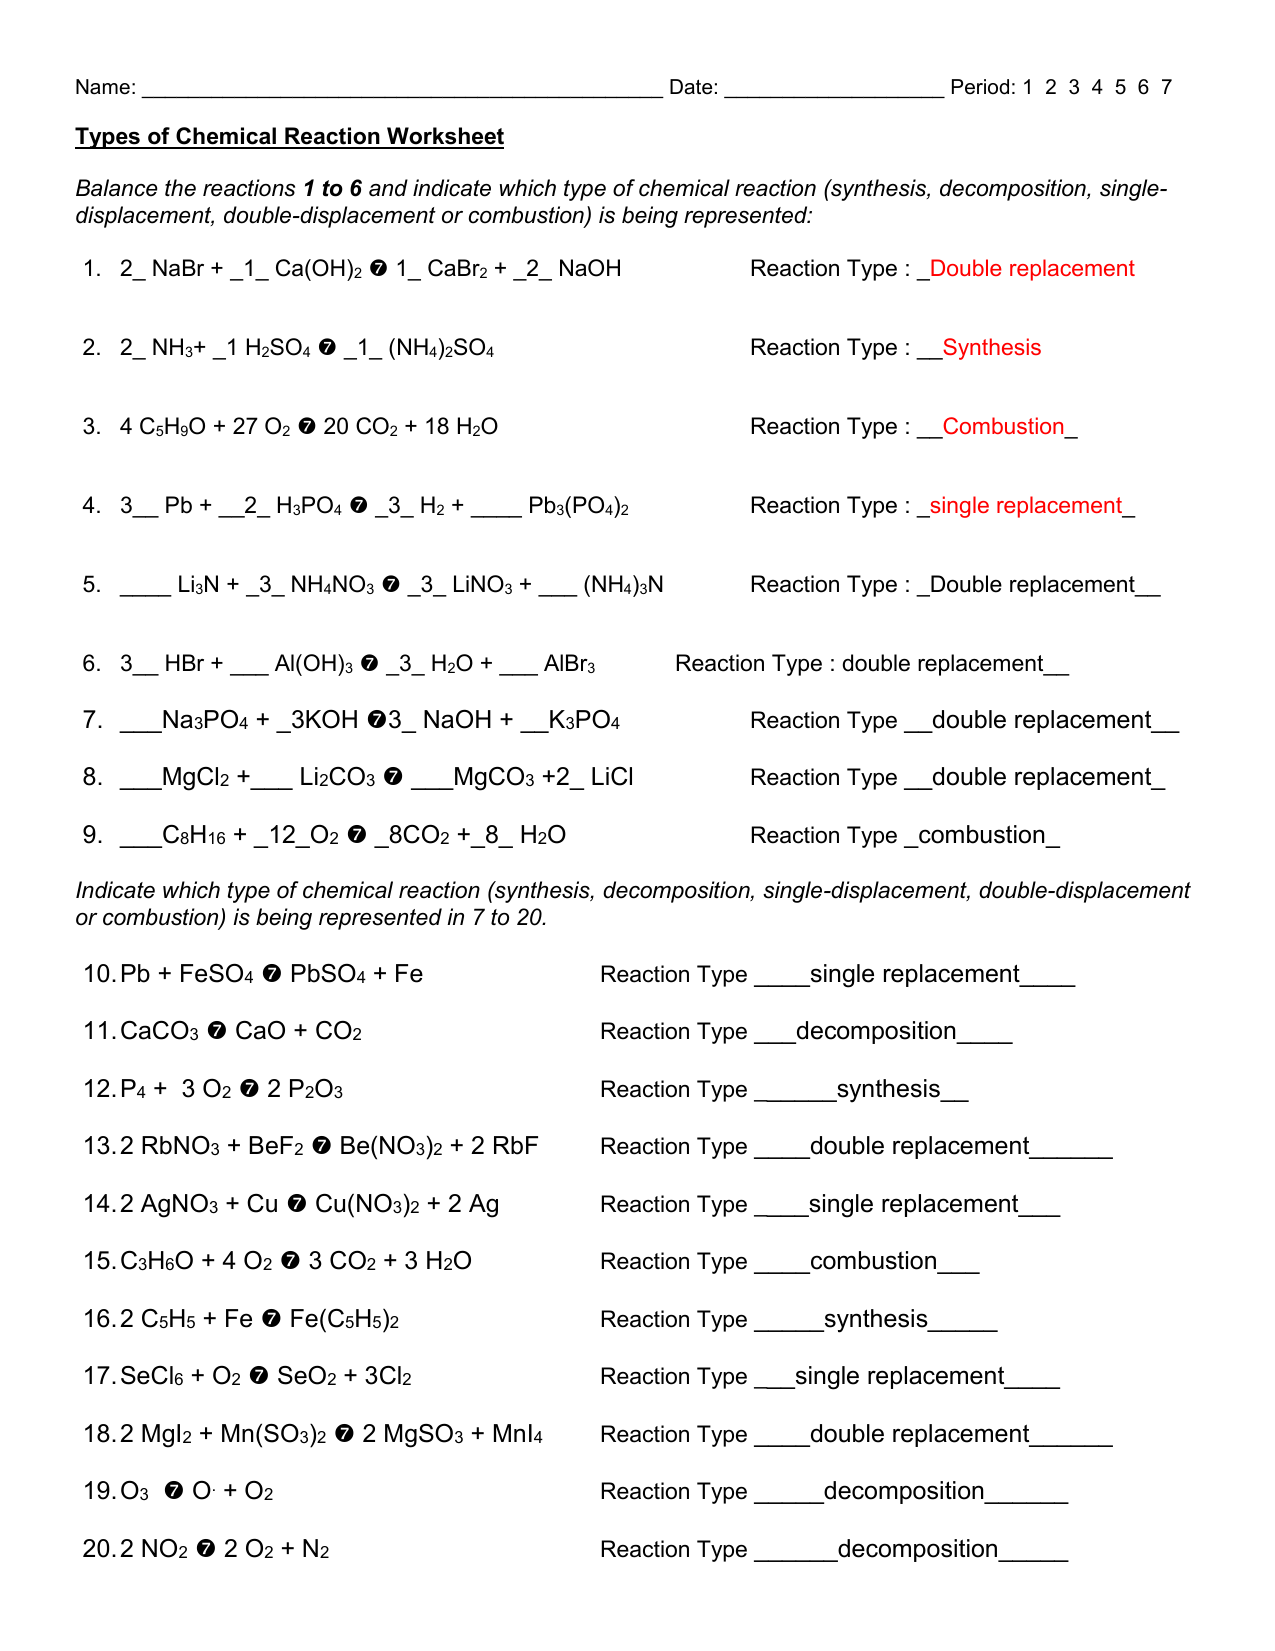 Types of Chemical Reaction Worksheetanswers Within Types Of Reactions Worksheet